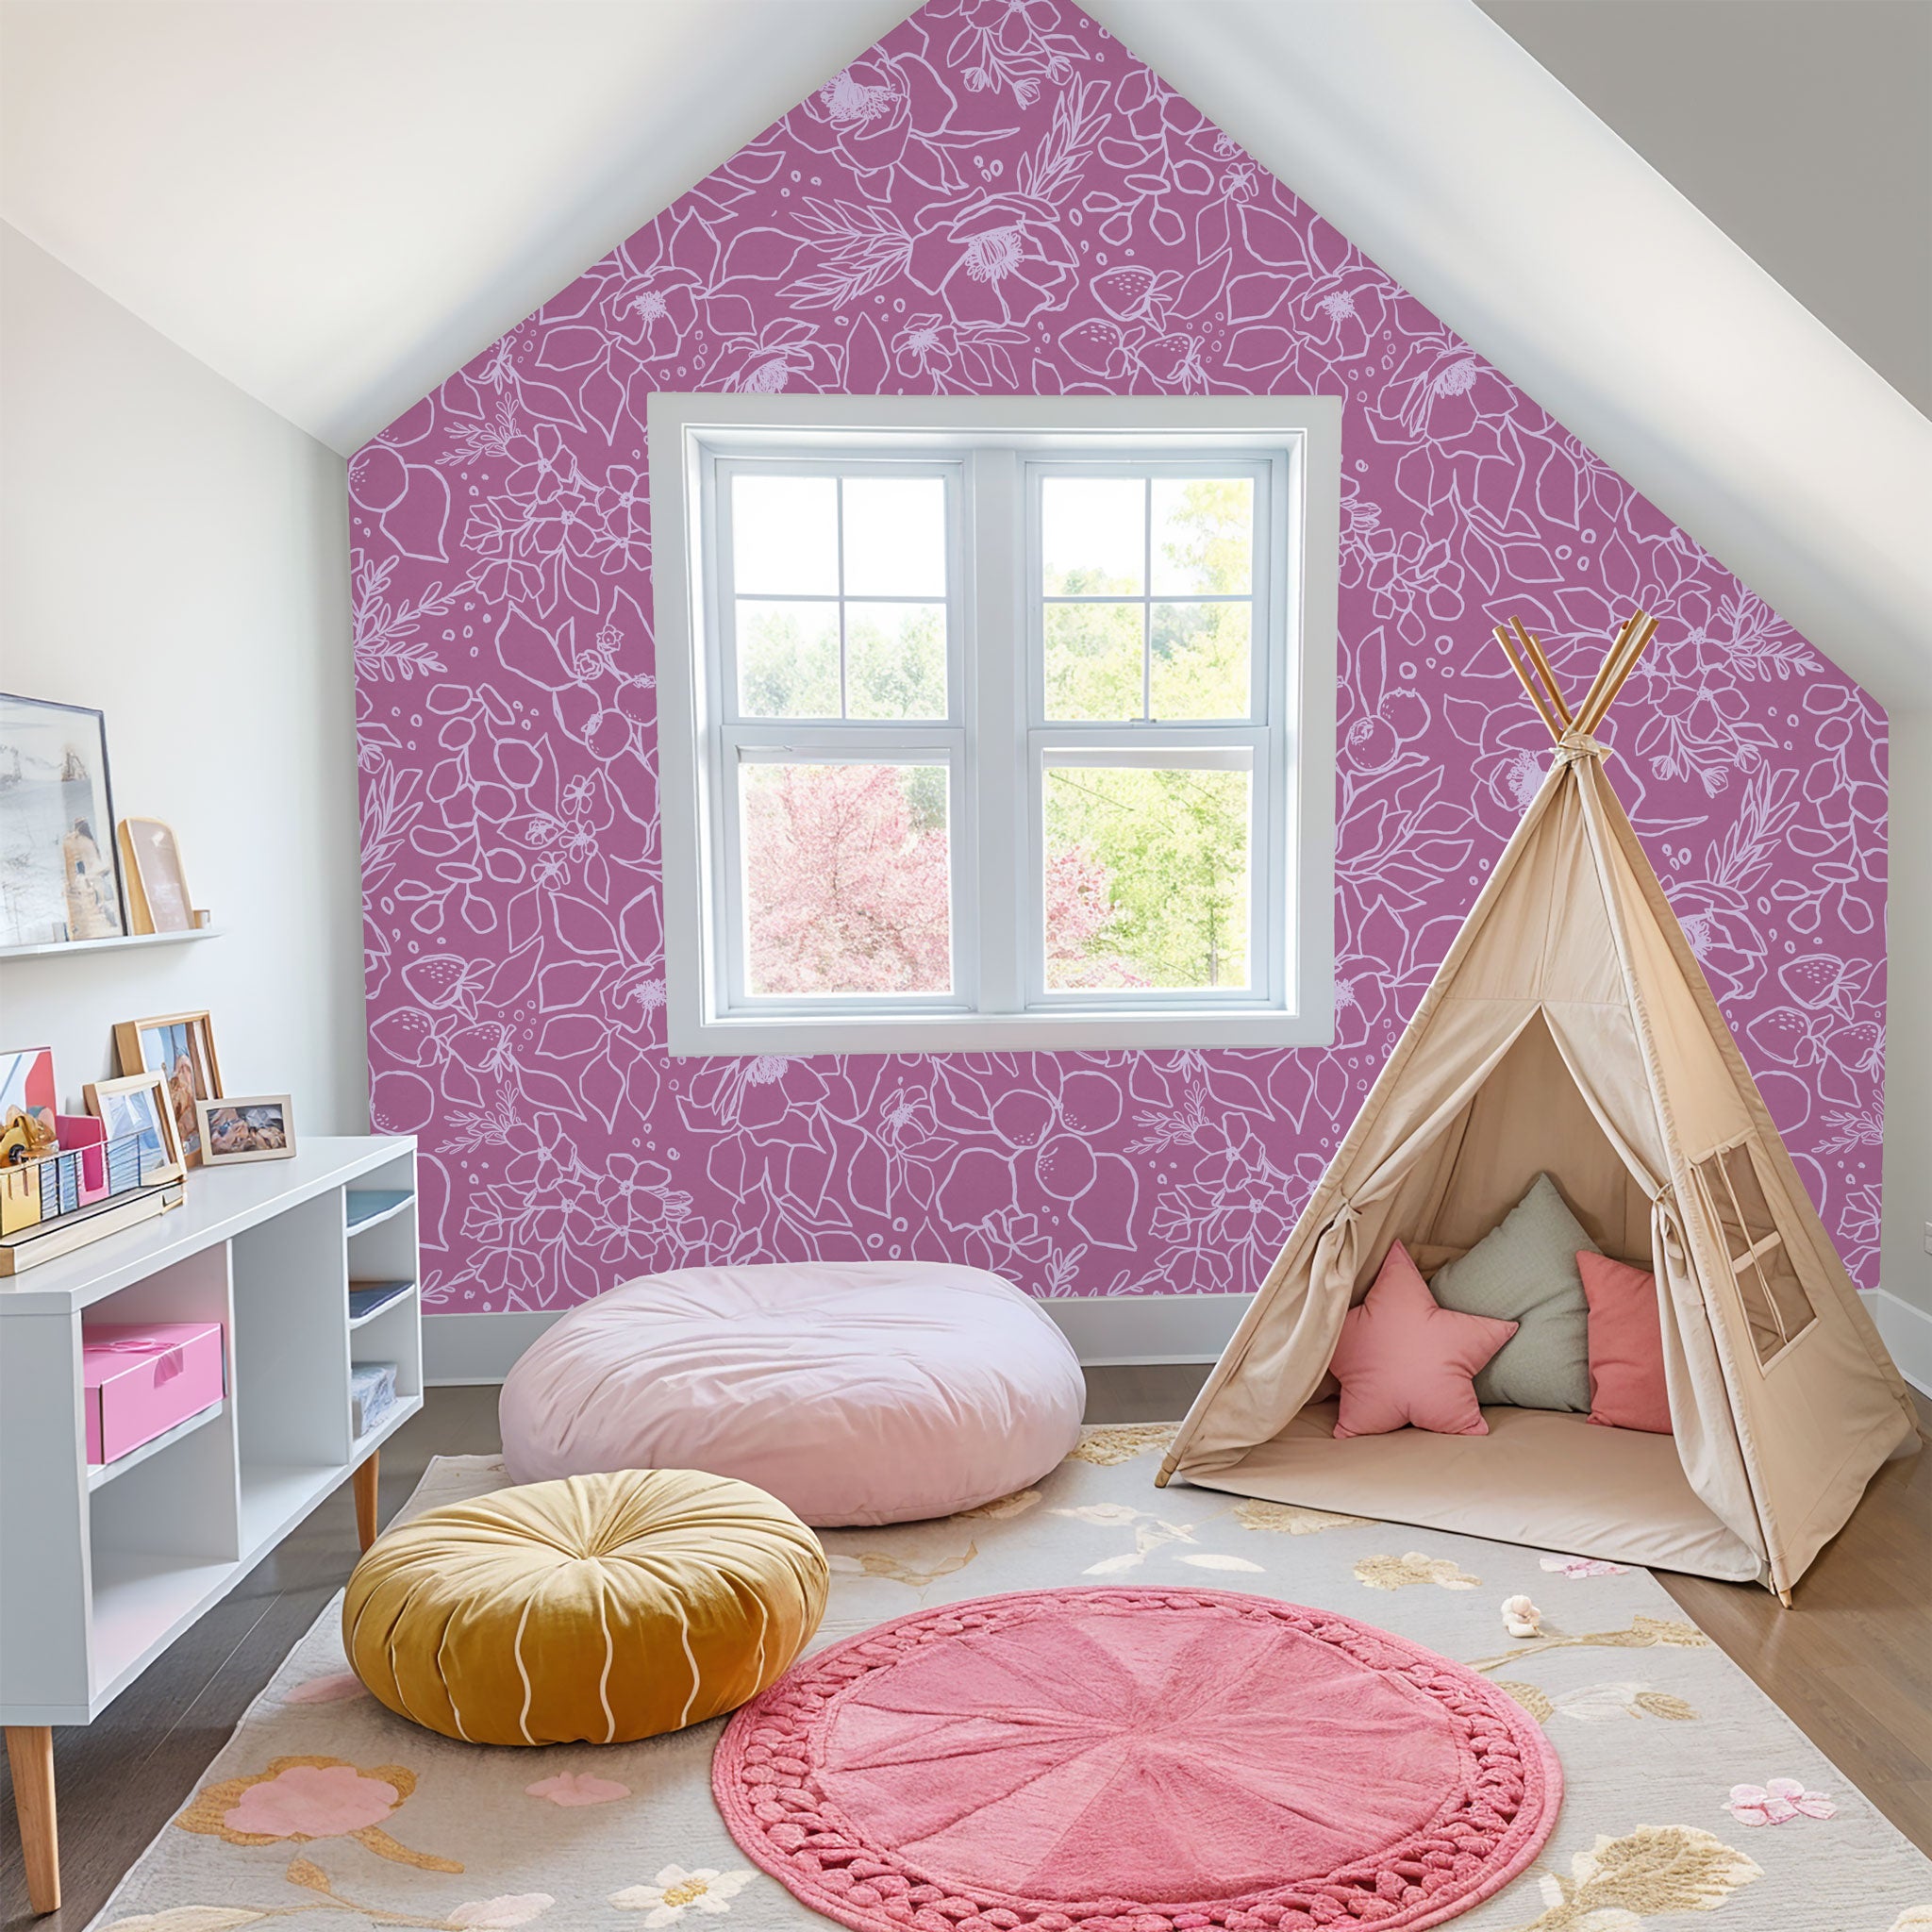 "Wall Blush's Paige (Pink) Wallpaper accentuating a cozy children's room with playful decor and natural light."